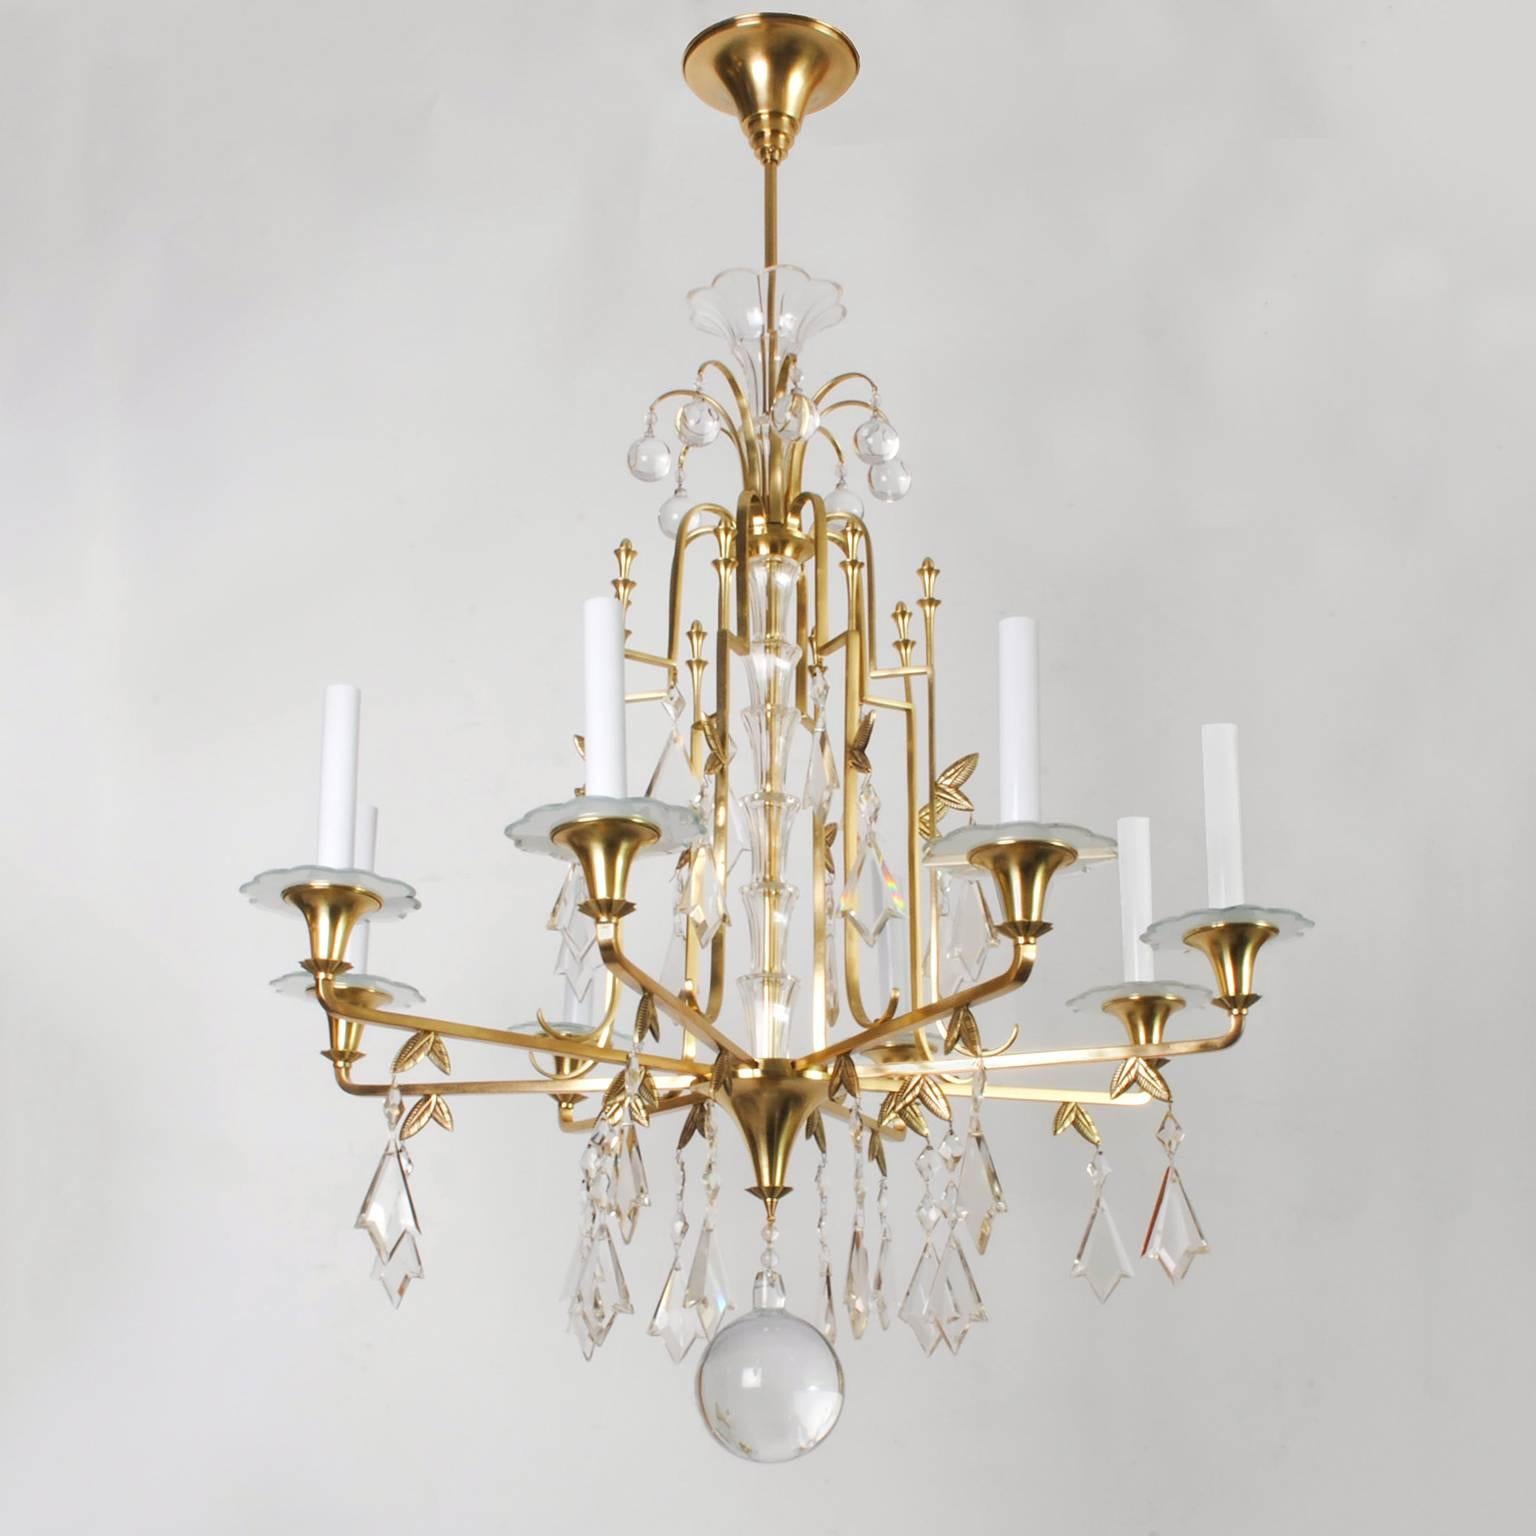 Polished Swedish Art Deco Eight-Arm Chandelier in Brass with Crystals